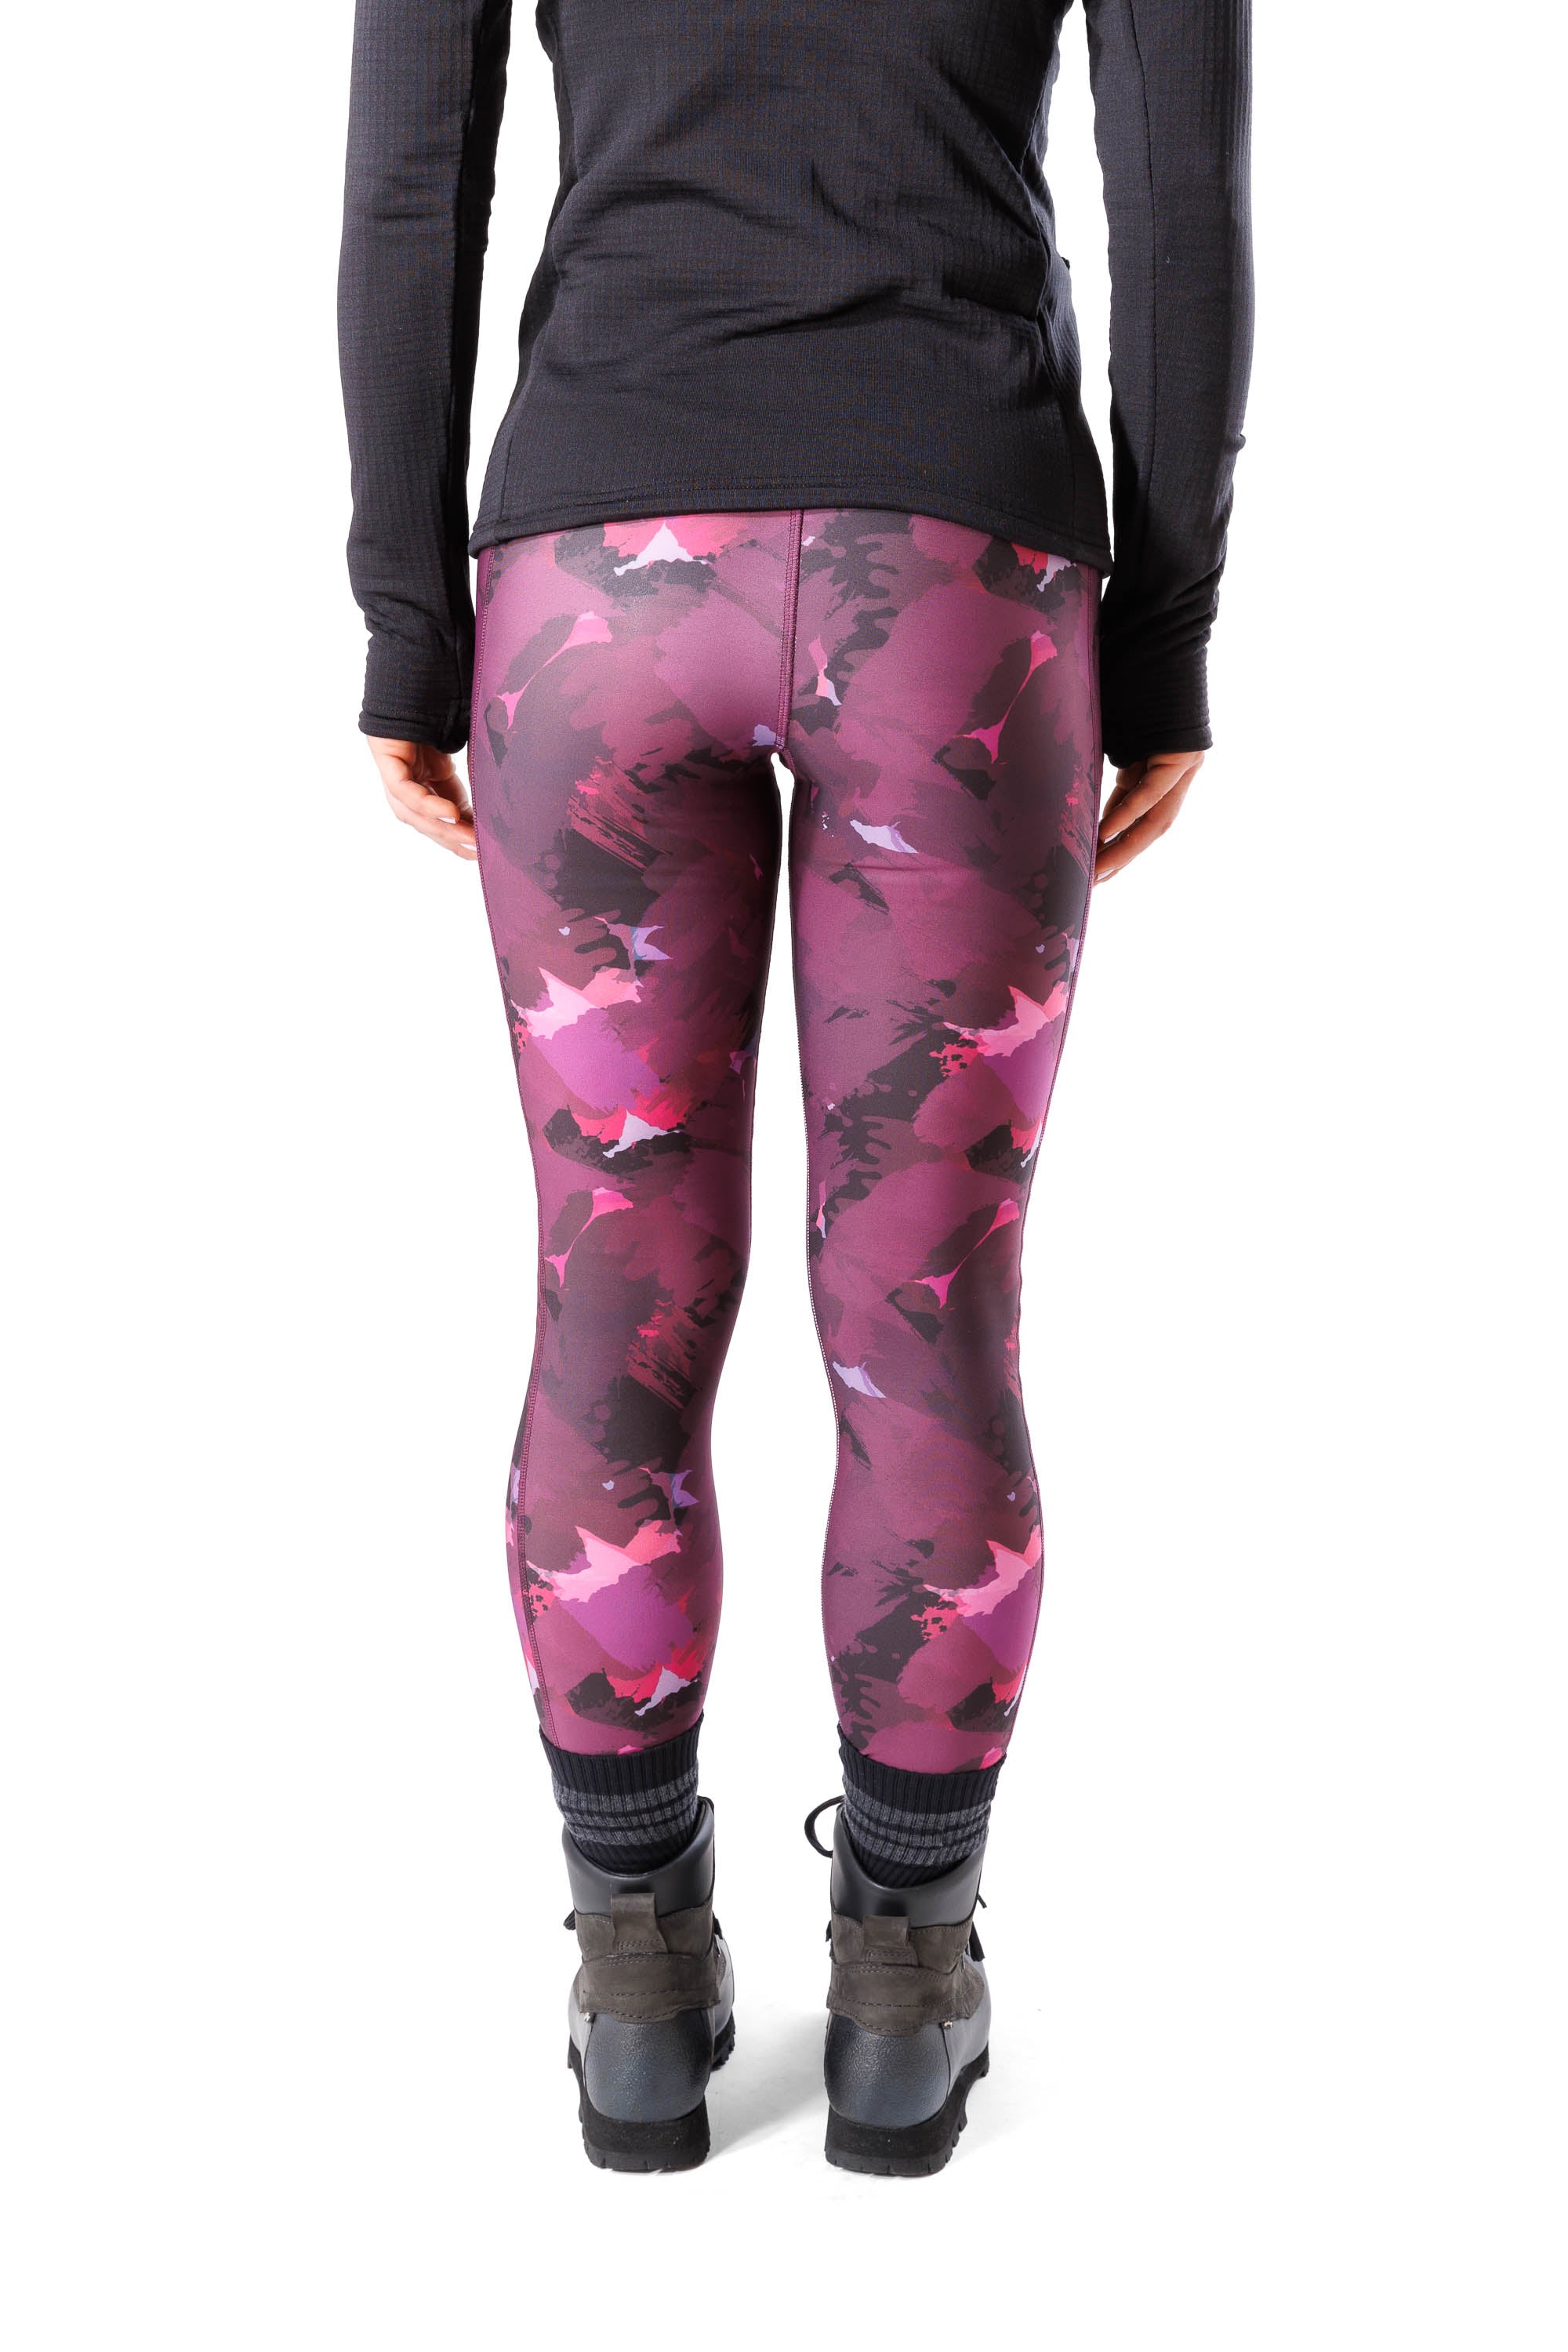 Winter Leggings Guide – Alpine Nation Outdoor Clothing